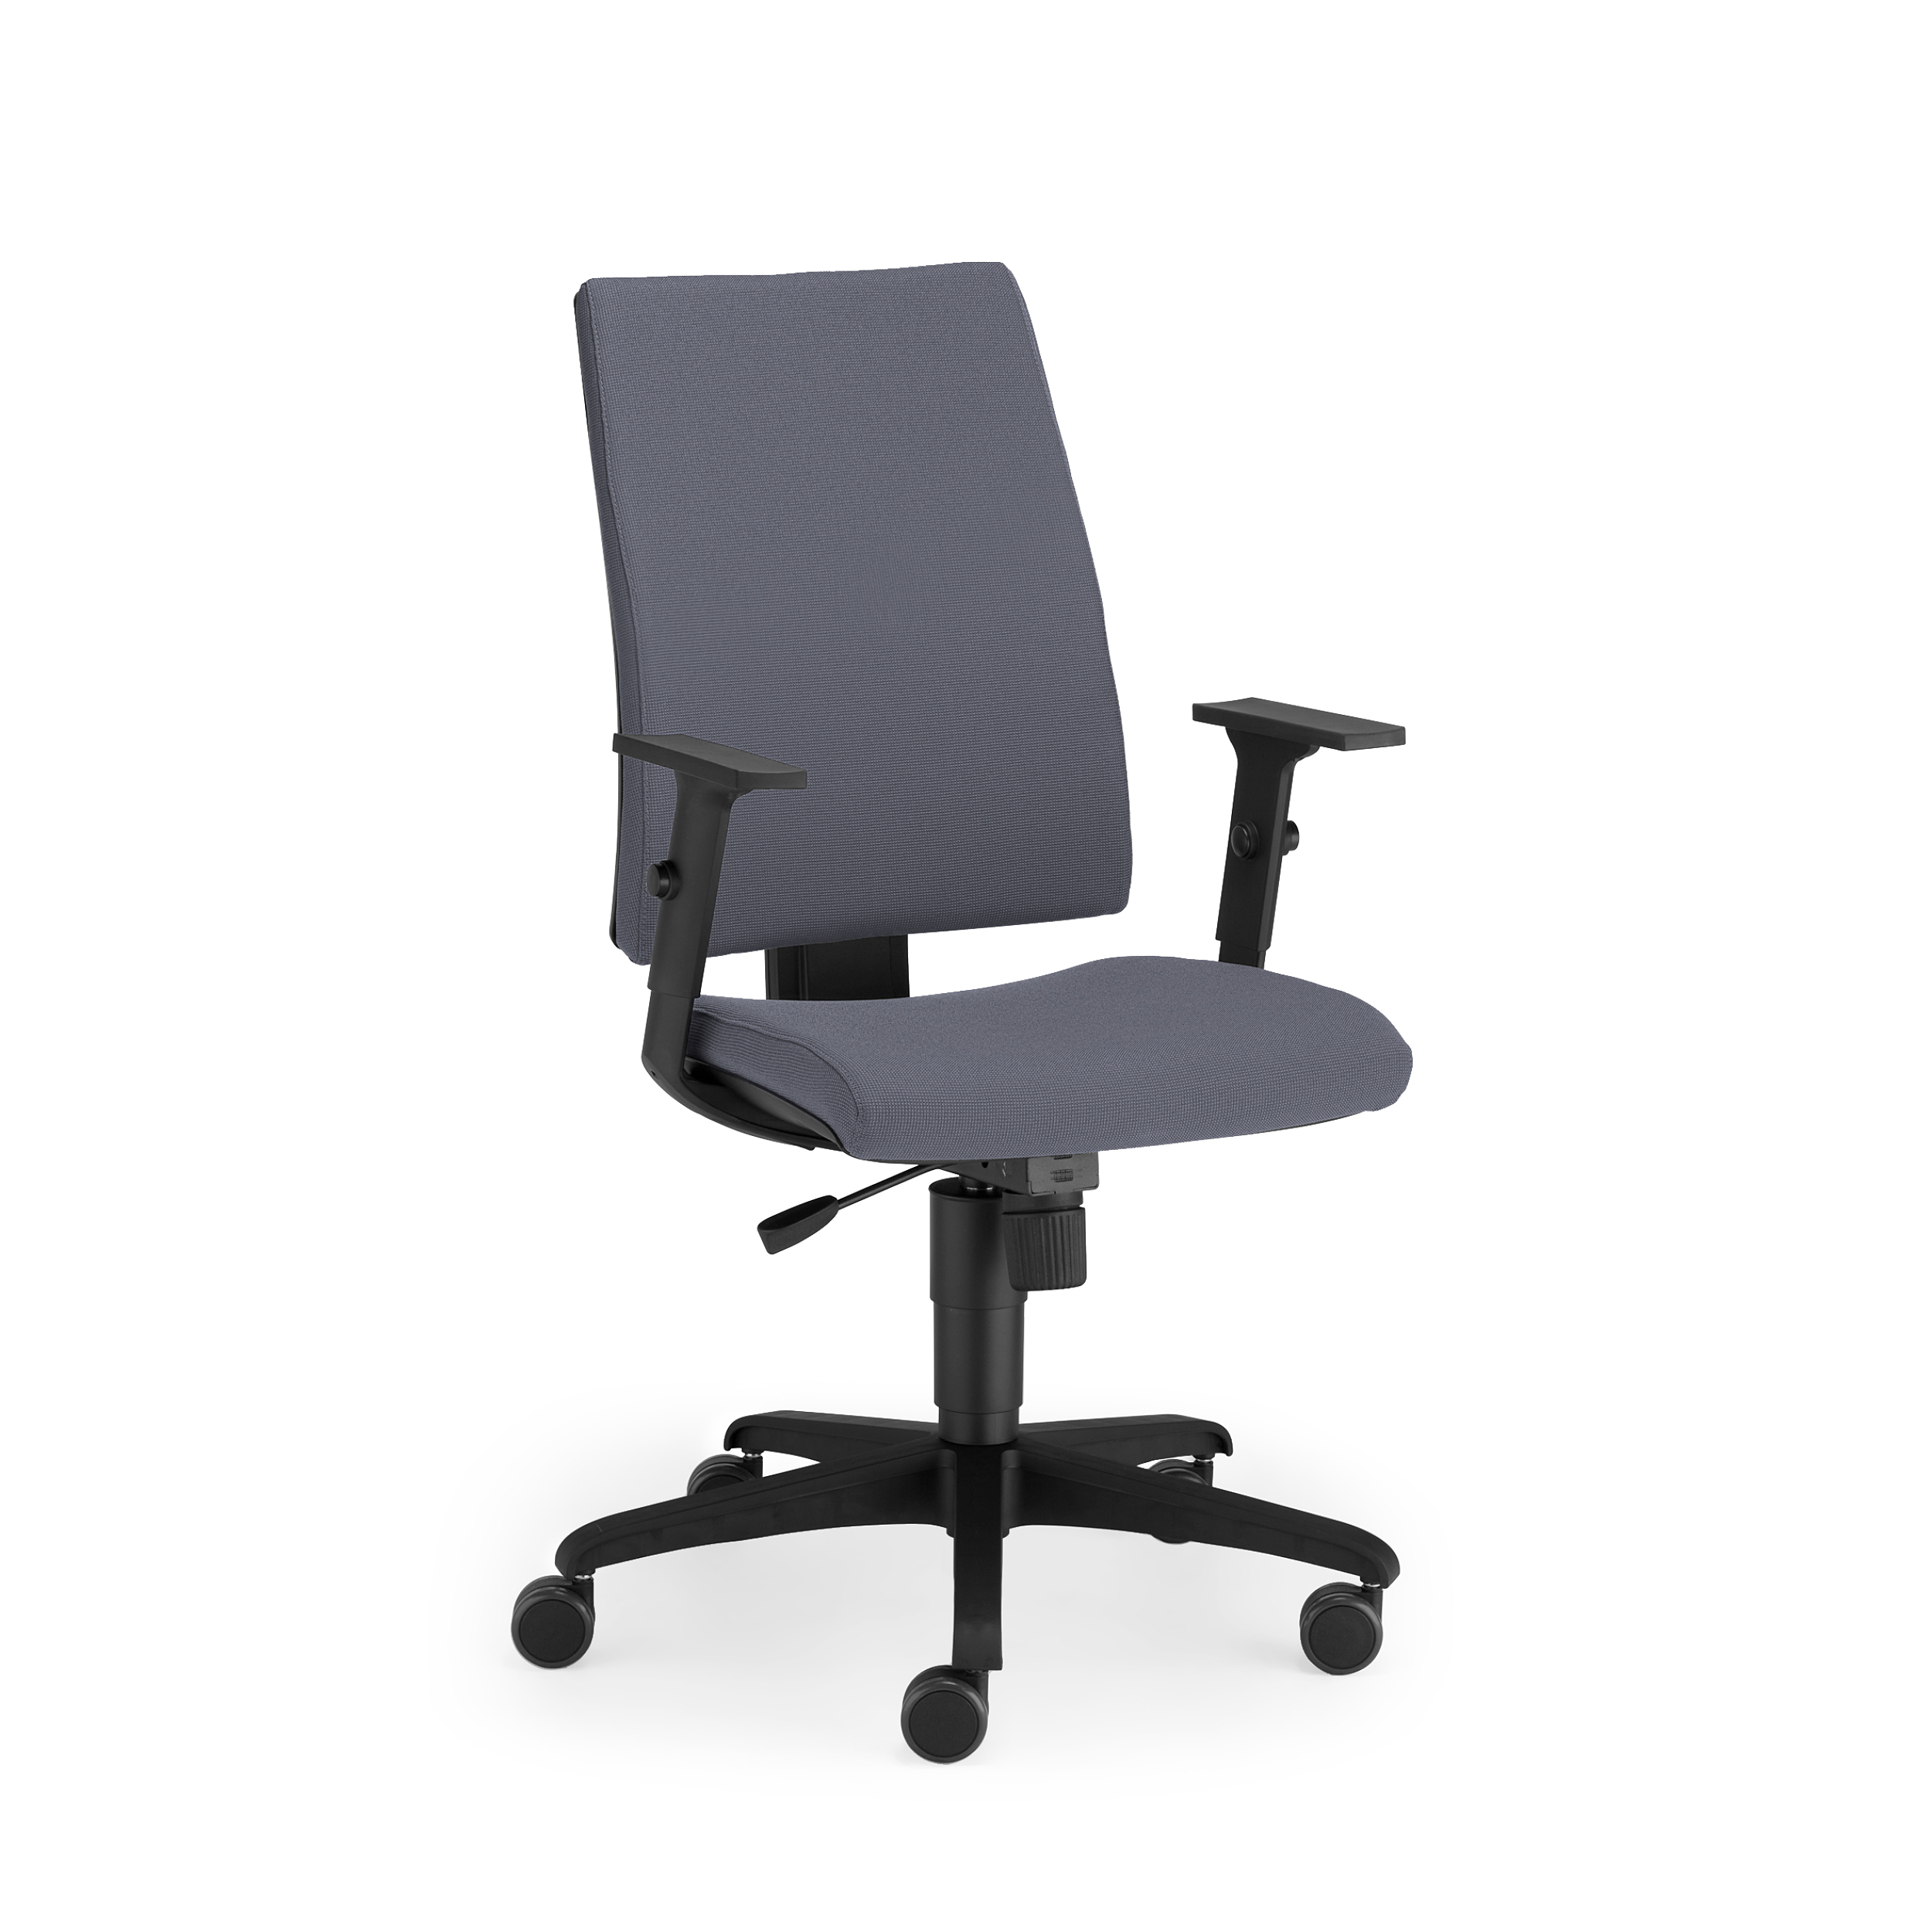 office-chairs_1-1_Intrata-17